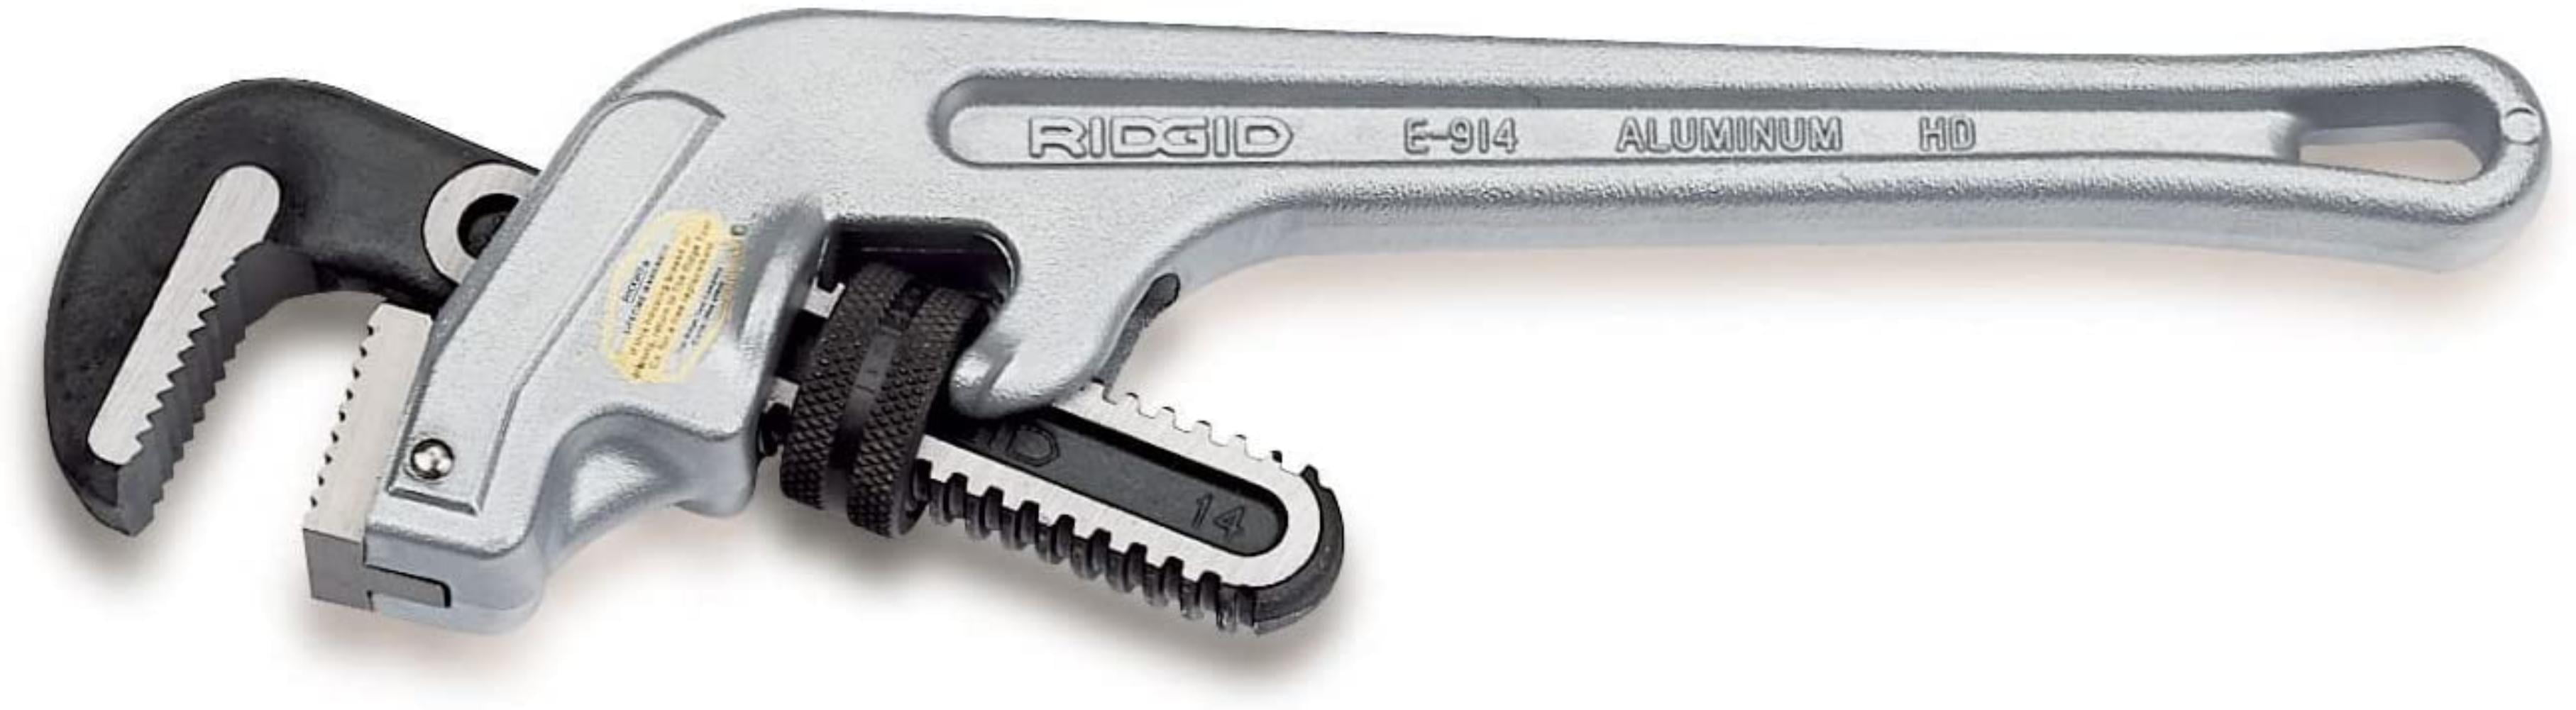 Model E-924 Details about   RIDGID 90127 24" Aluminum End Pipe Wrench 